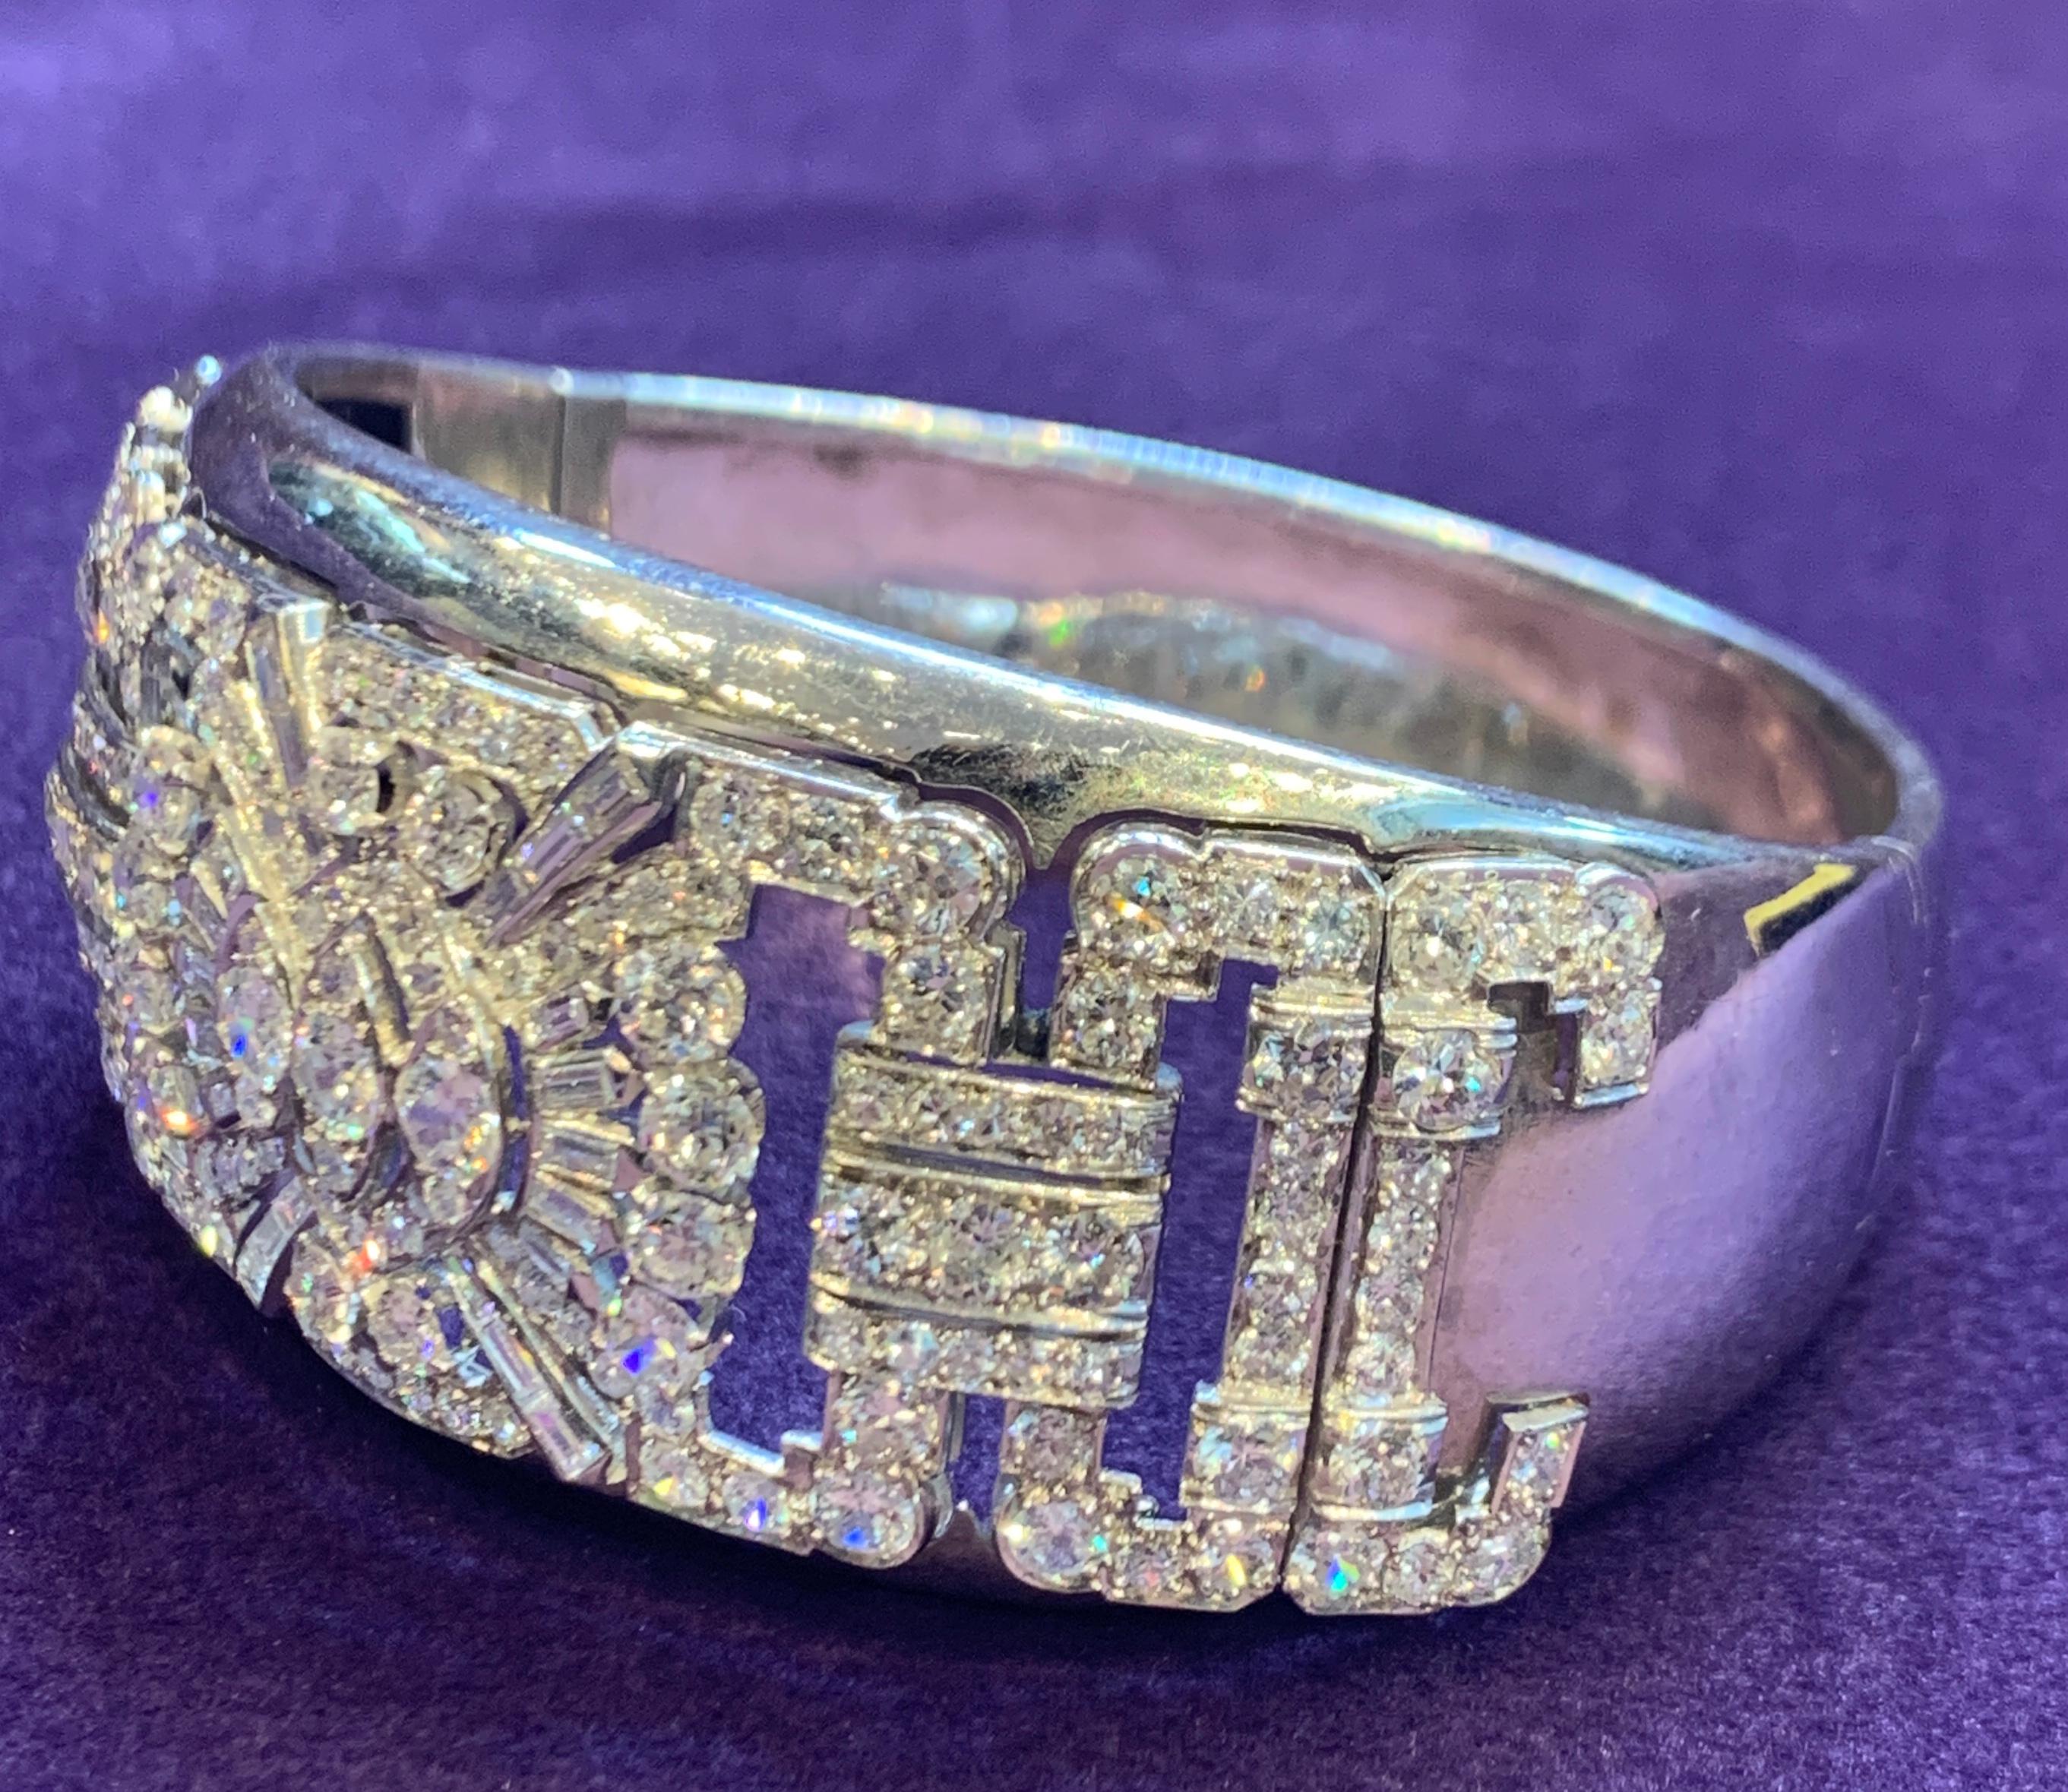 Diamond And White Gold Large Bangle Bracelet
3 centered diamond plaques mounted from the 1940's as a bangle 
14K White Gold
62.7 Grams
7